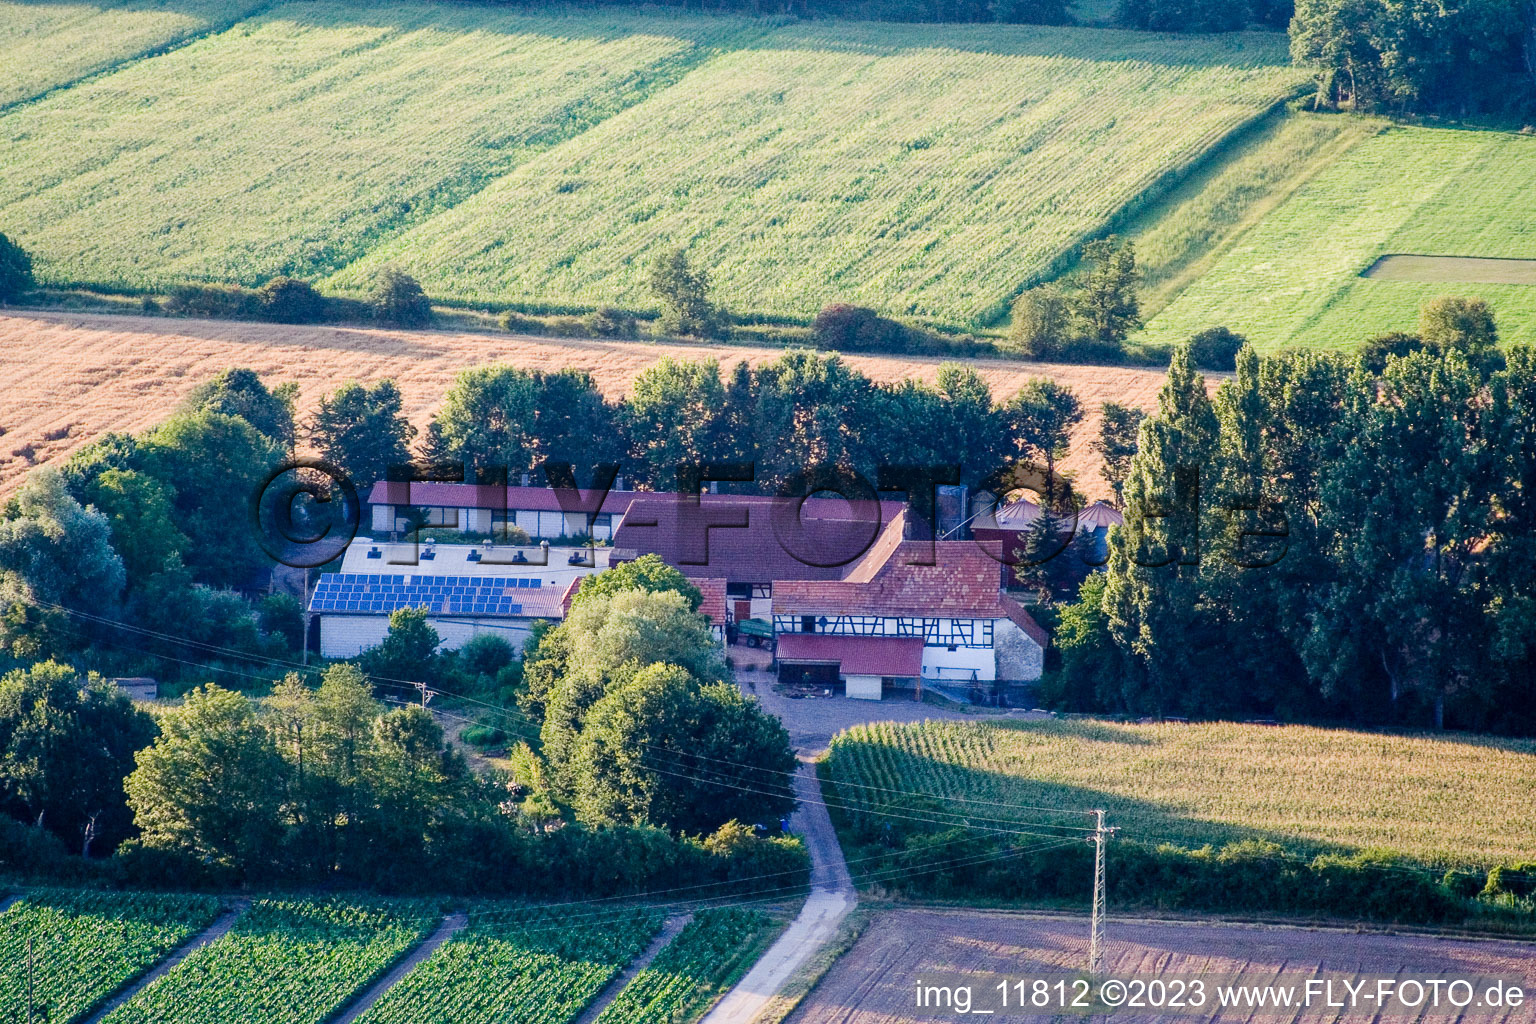 Aerial view of At Erlenbach, Leistenmühle in Kandel in the state Rhineland-Palatinate, Germany